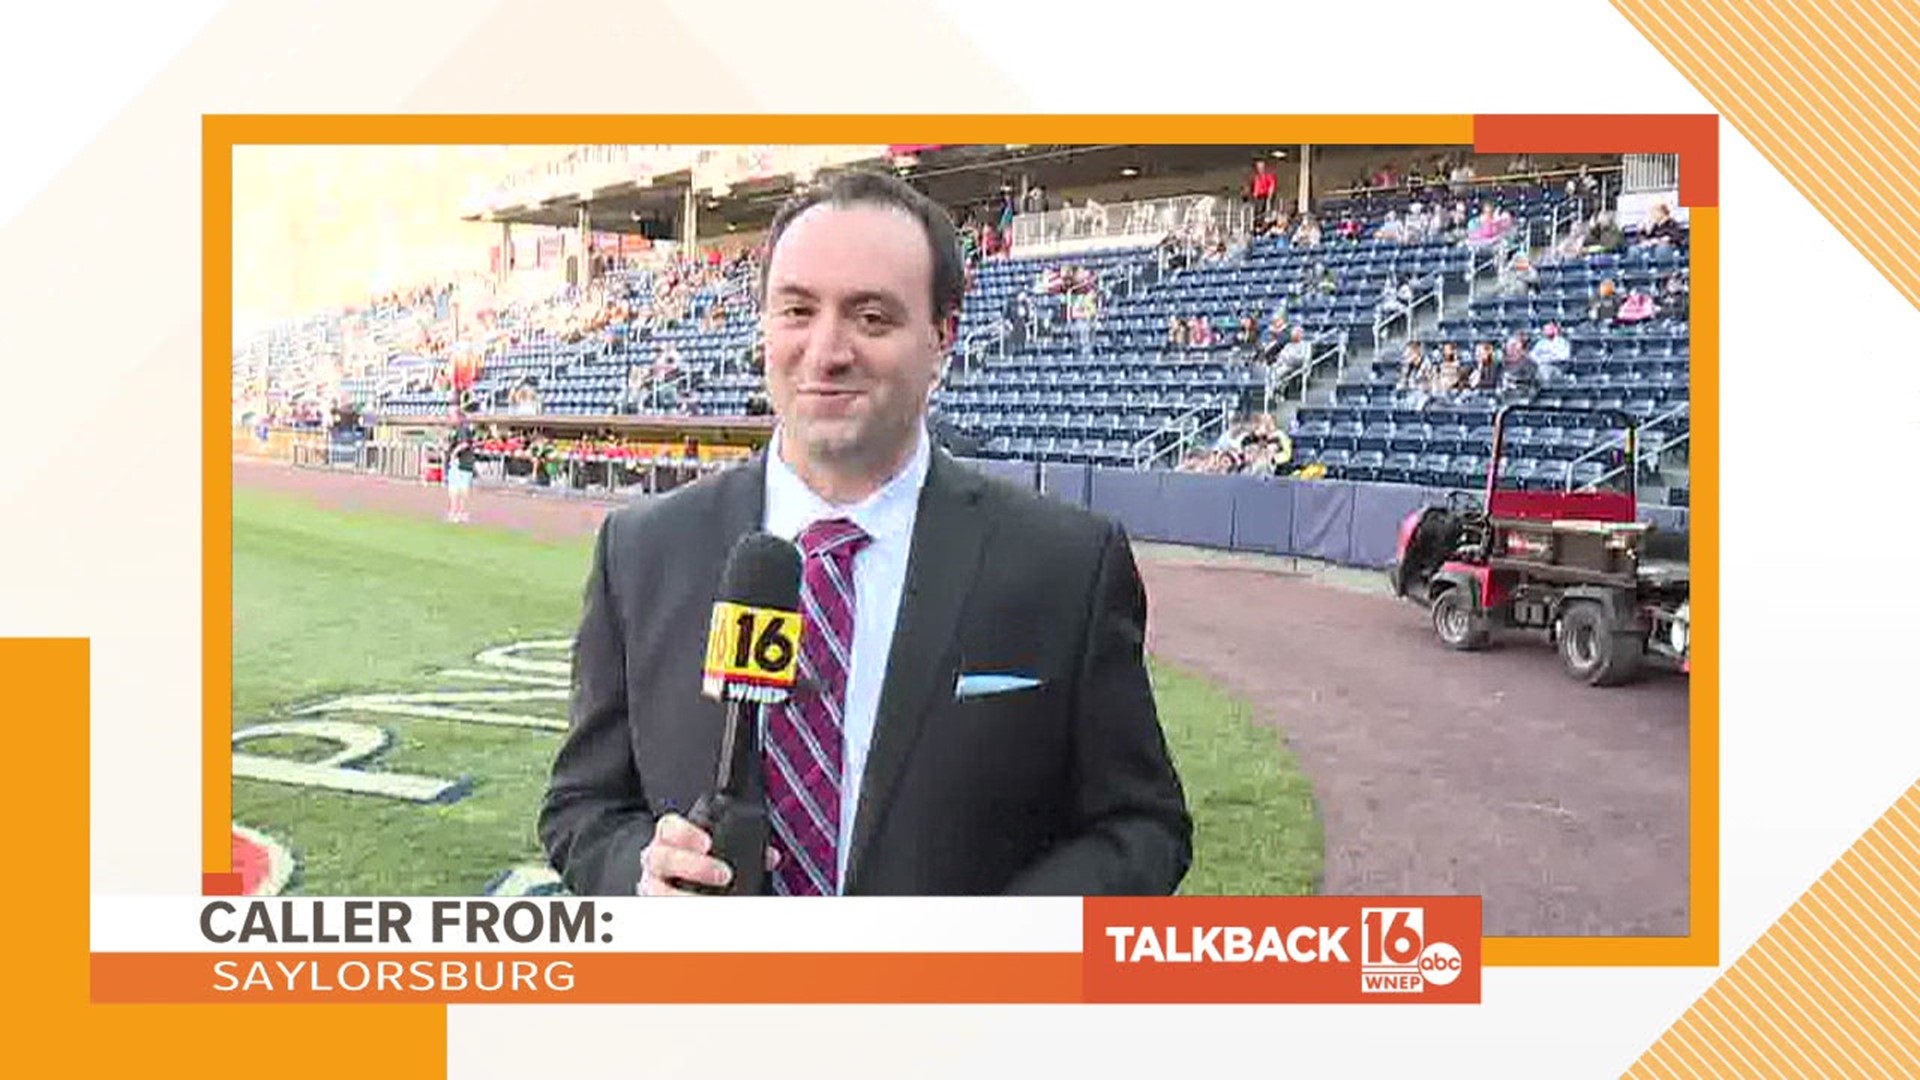 Two callers have some harsh words about Newswatch 16's coverage of the RailRiders' opening day.